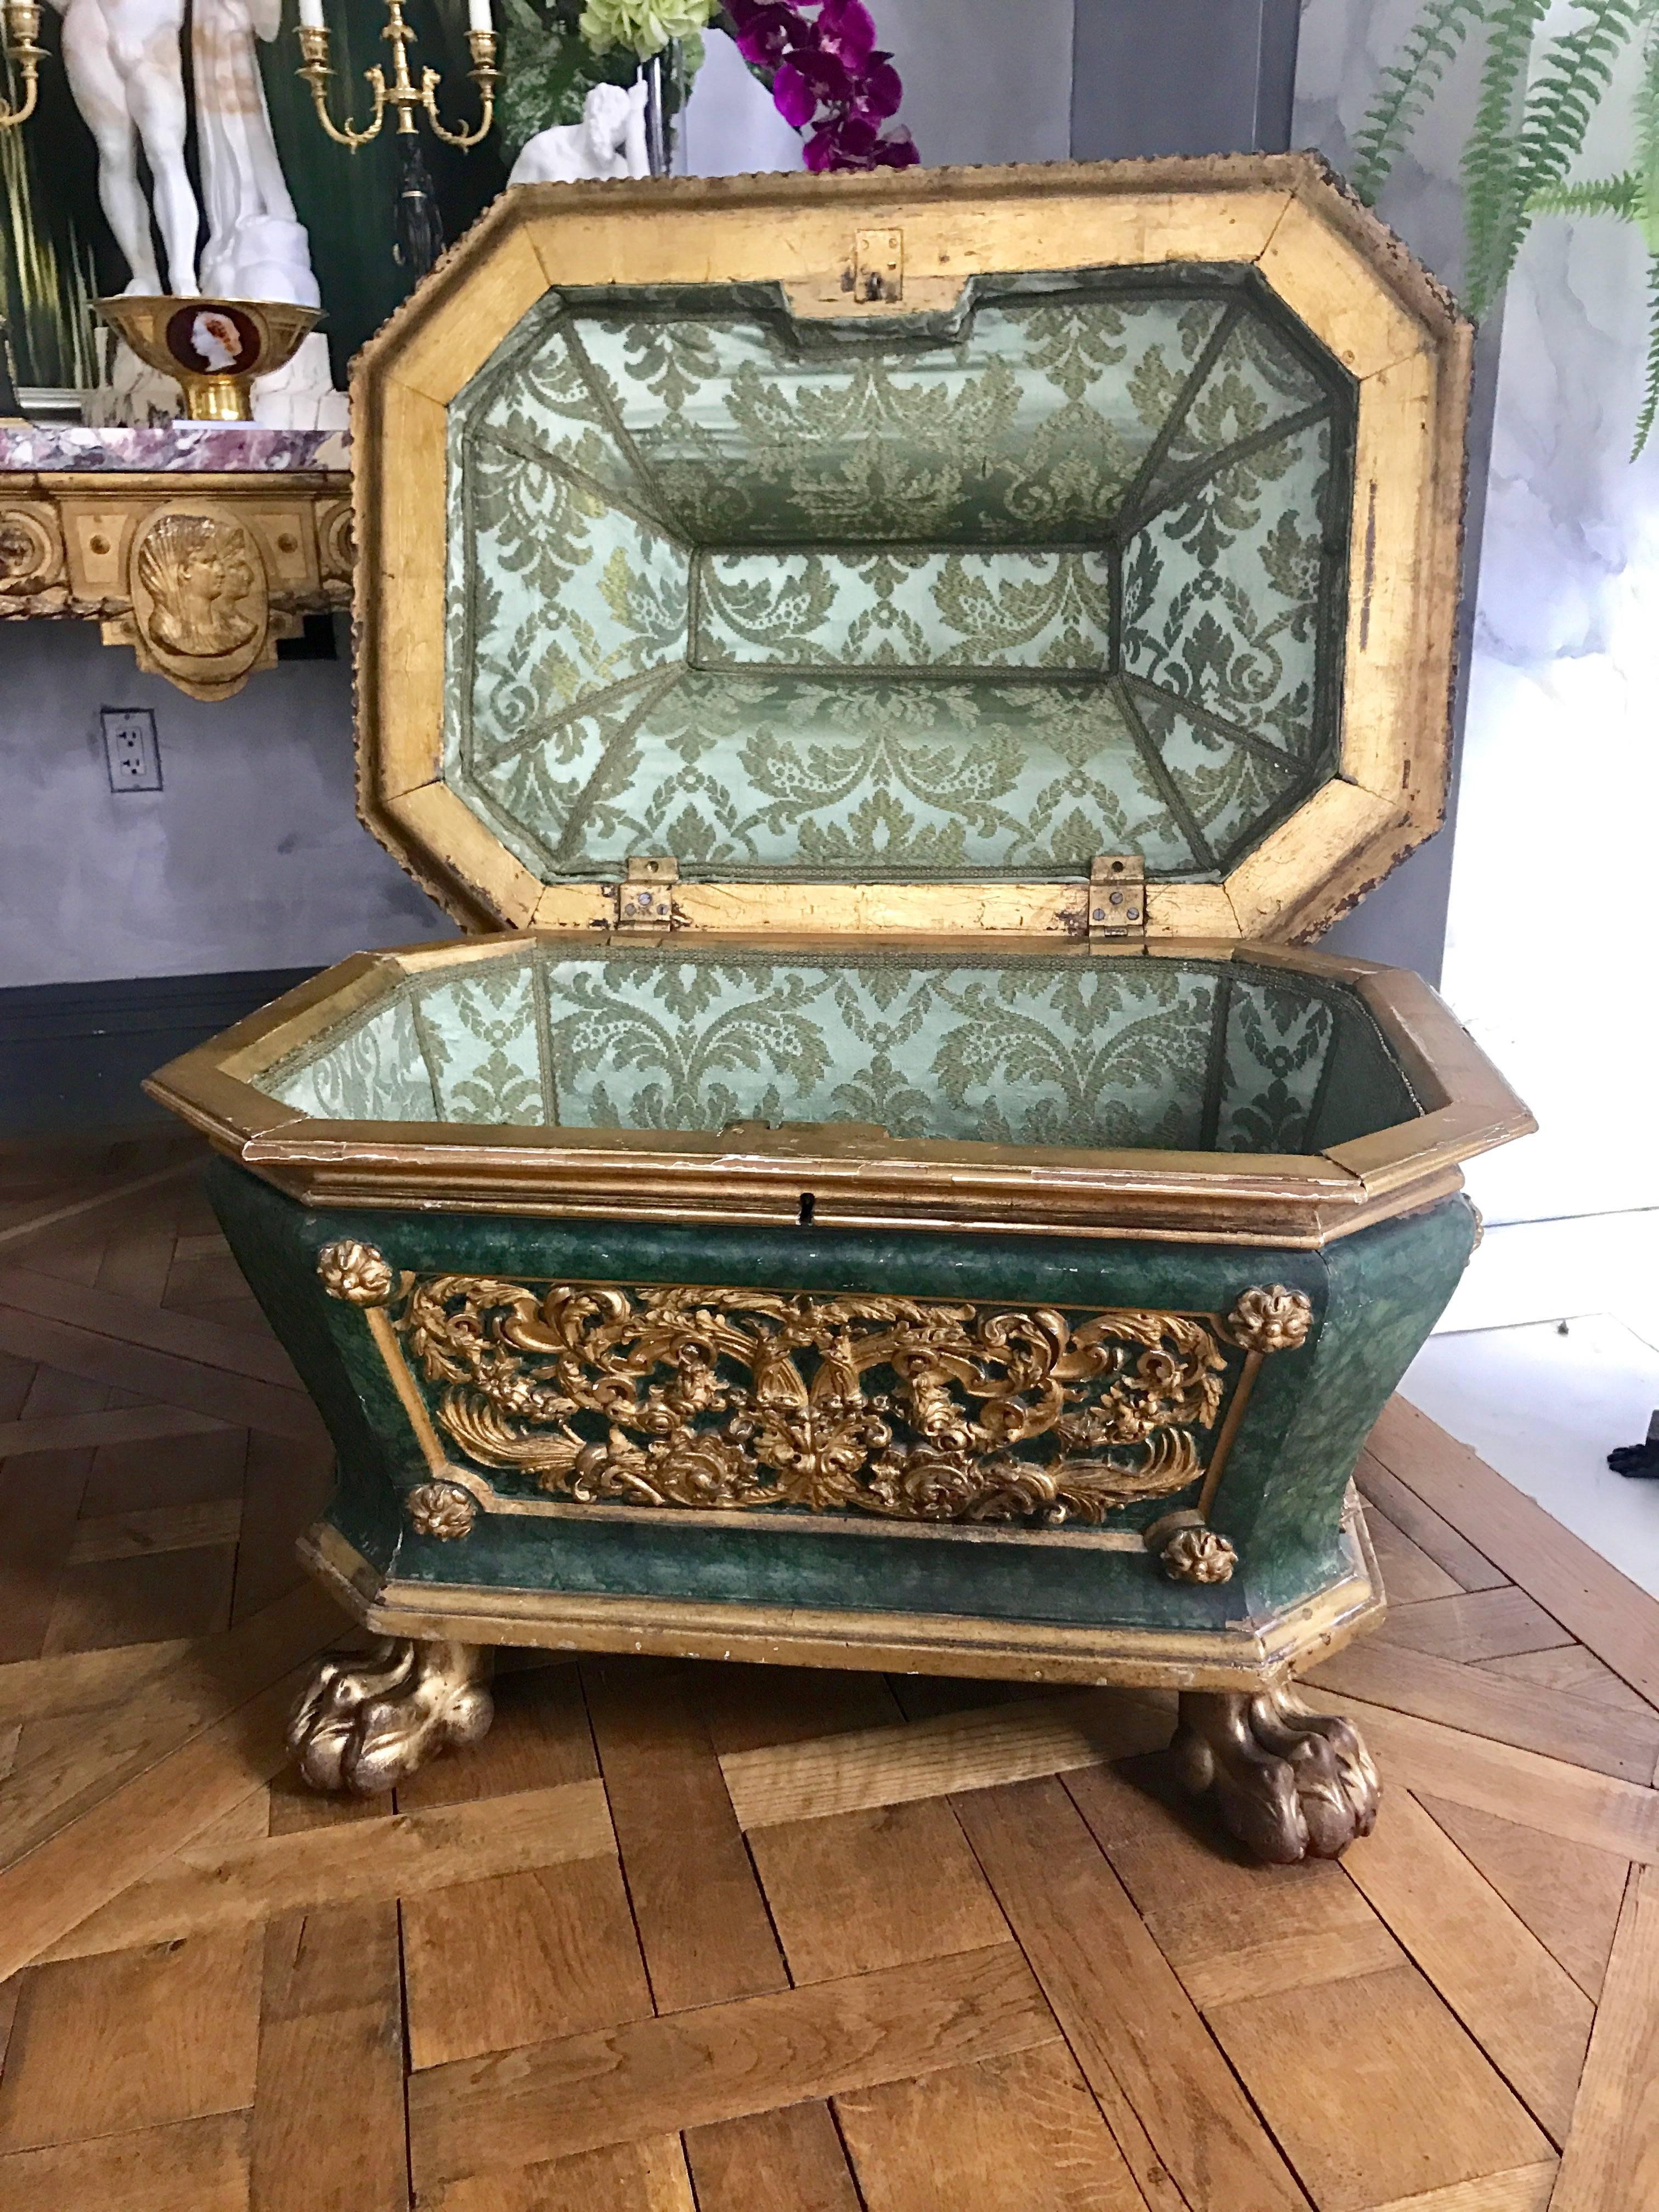 18th Century Italian Cellaret/Wine Cooler, Giltwood and Faux Malachite. This one of a kind cellaret is constructed out of walnut in the form of a cassone with a pagoda shaped hinged lid. The carvings are exquisite and retain their original gold, so